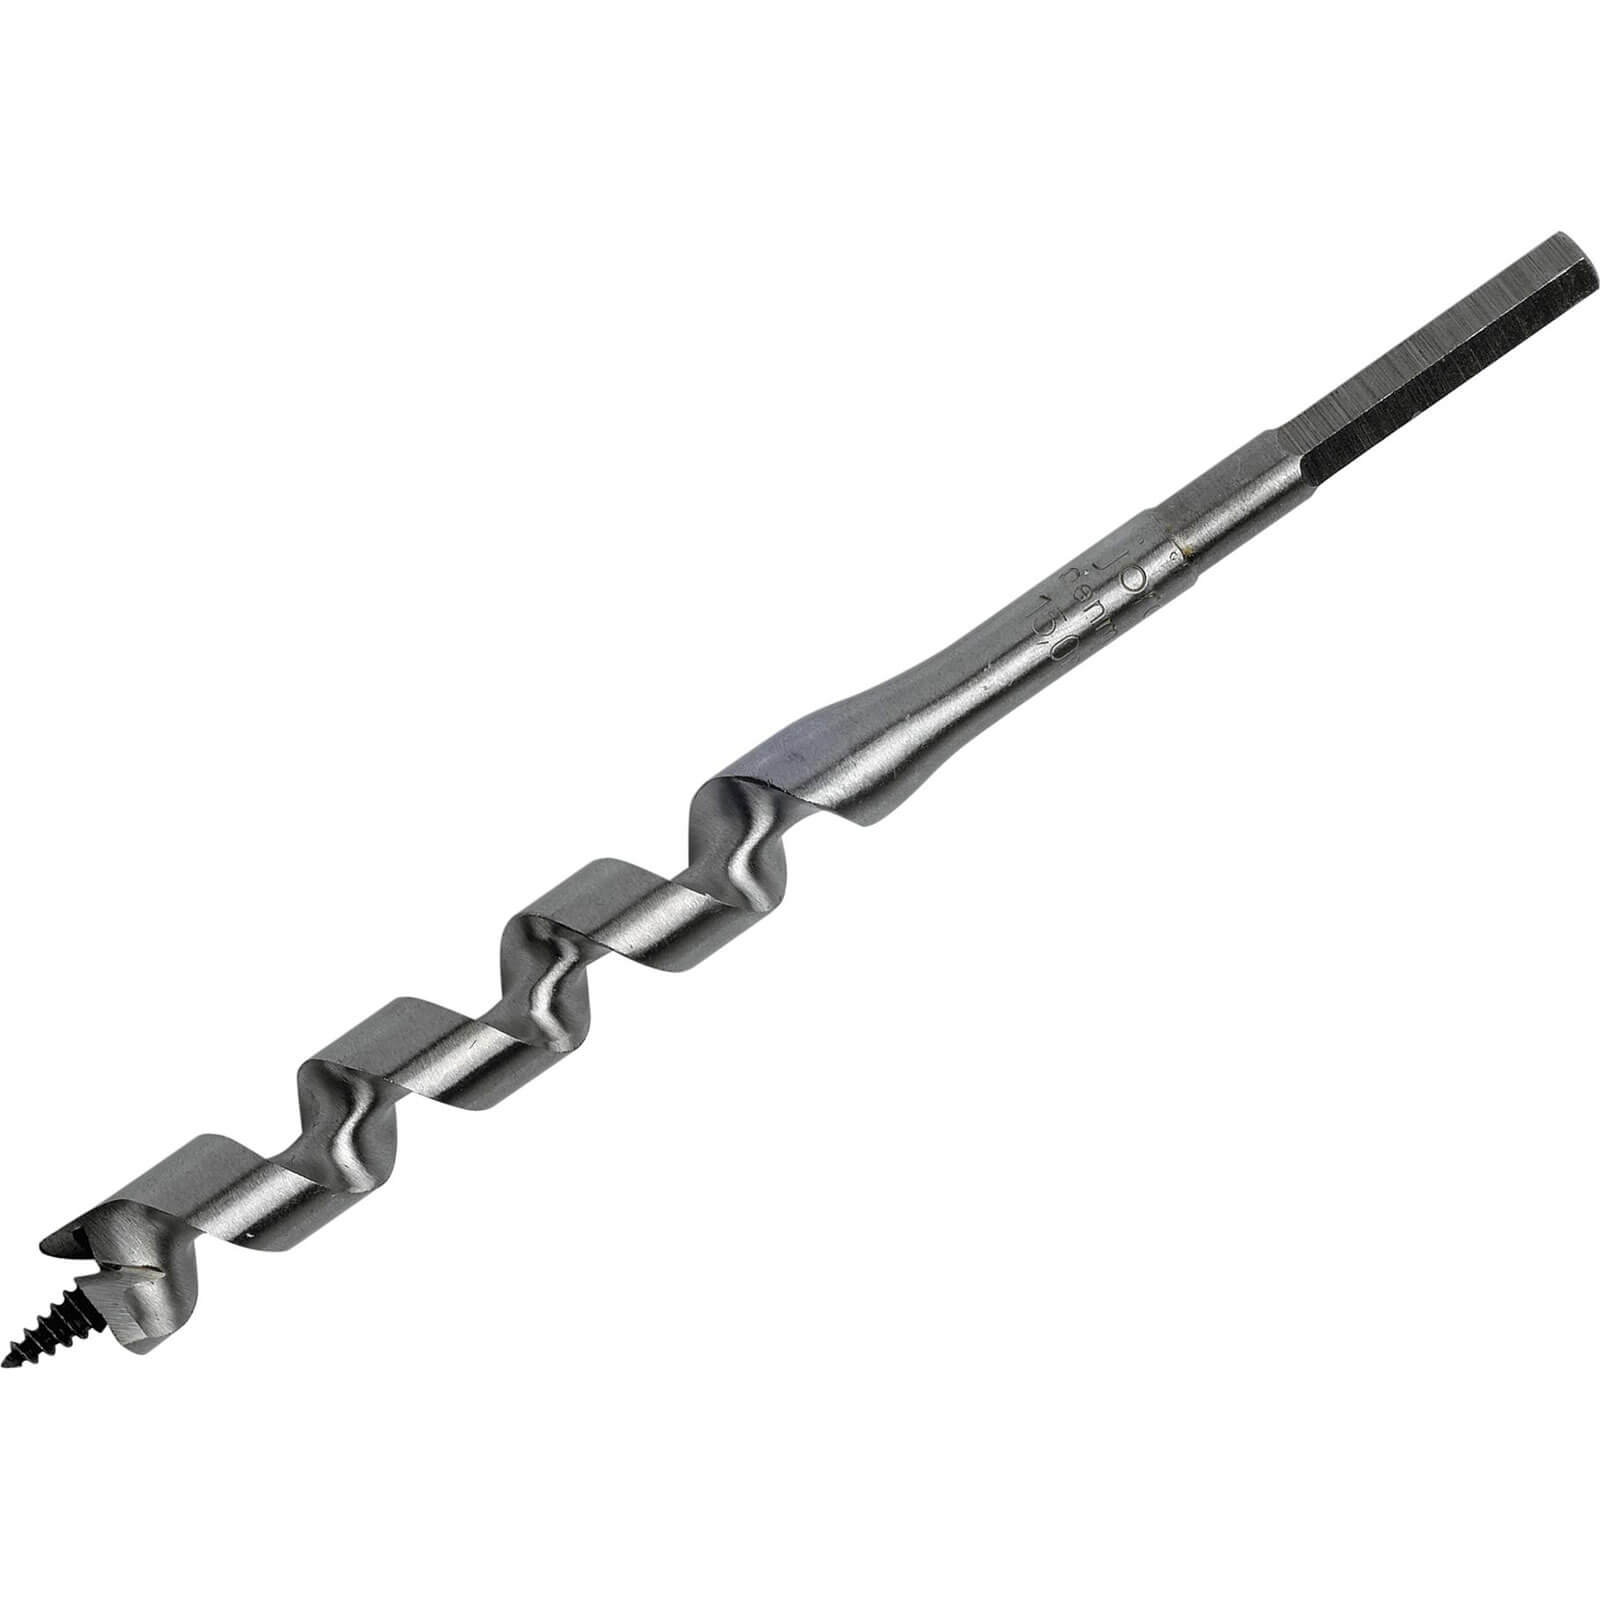 Image of Irwin Wood Auger Drill Bit 11mm 191mm